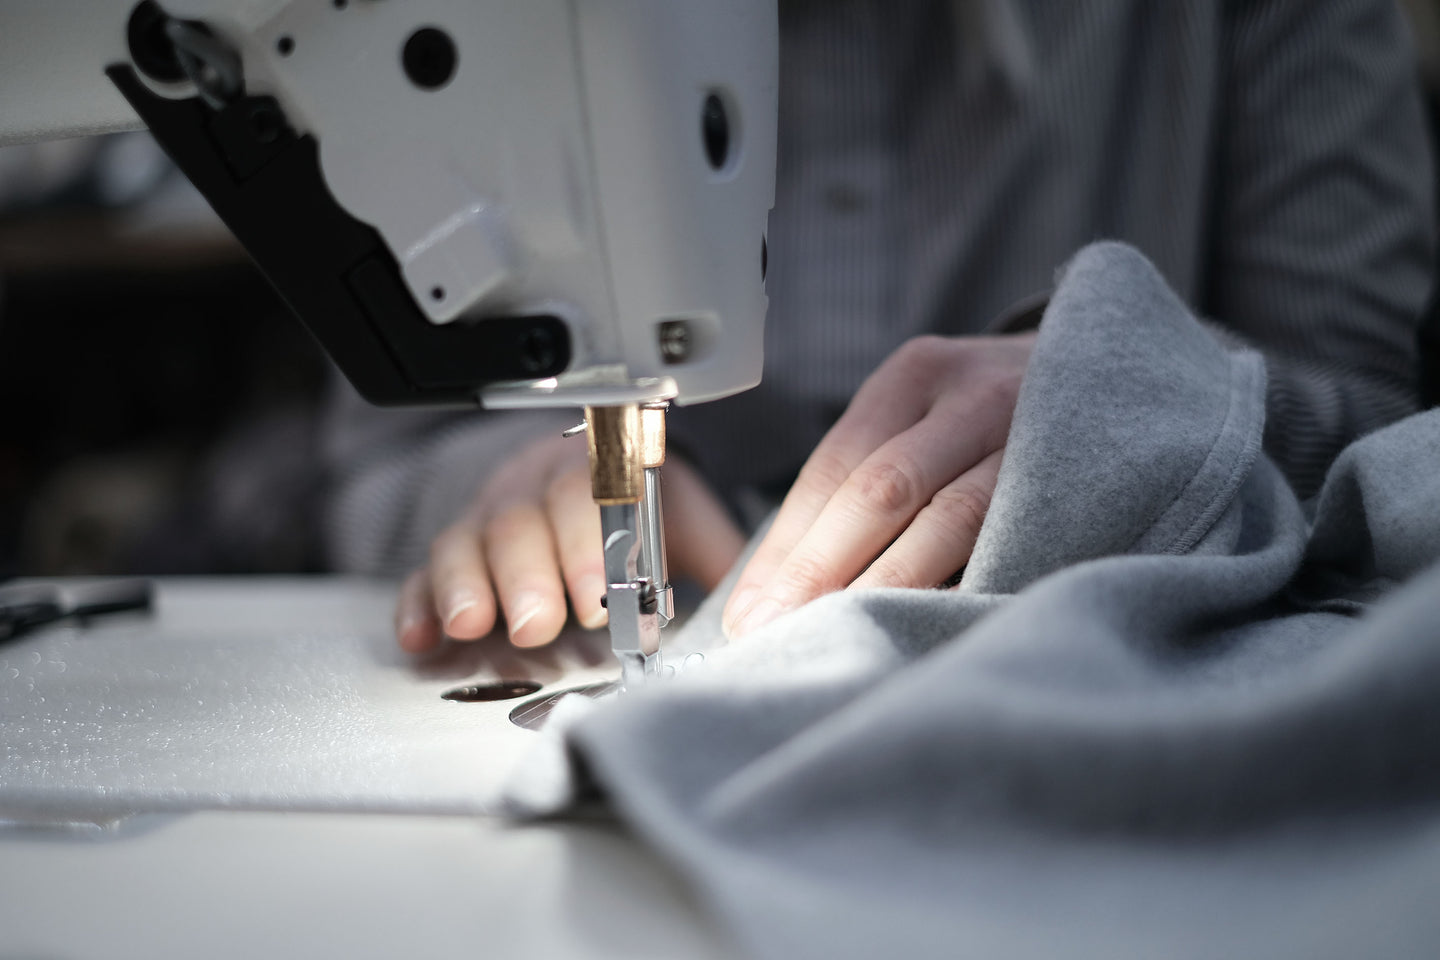 Our whippet coats are made by a highly skilled team